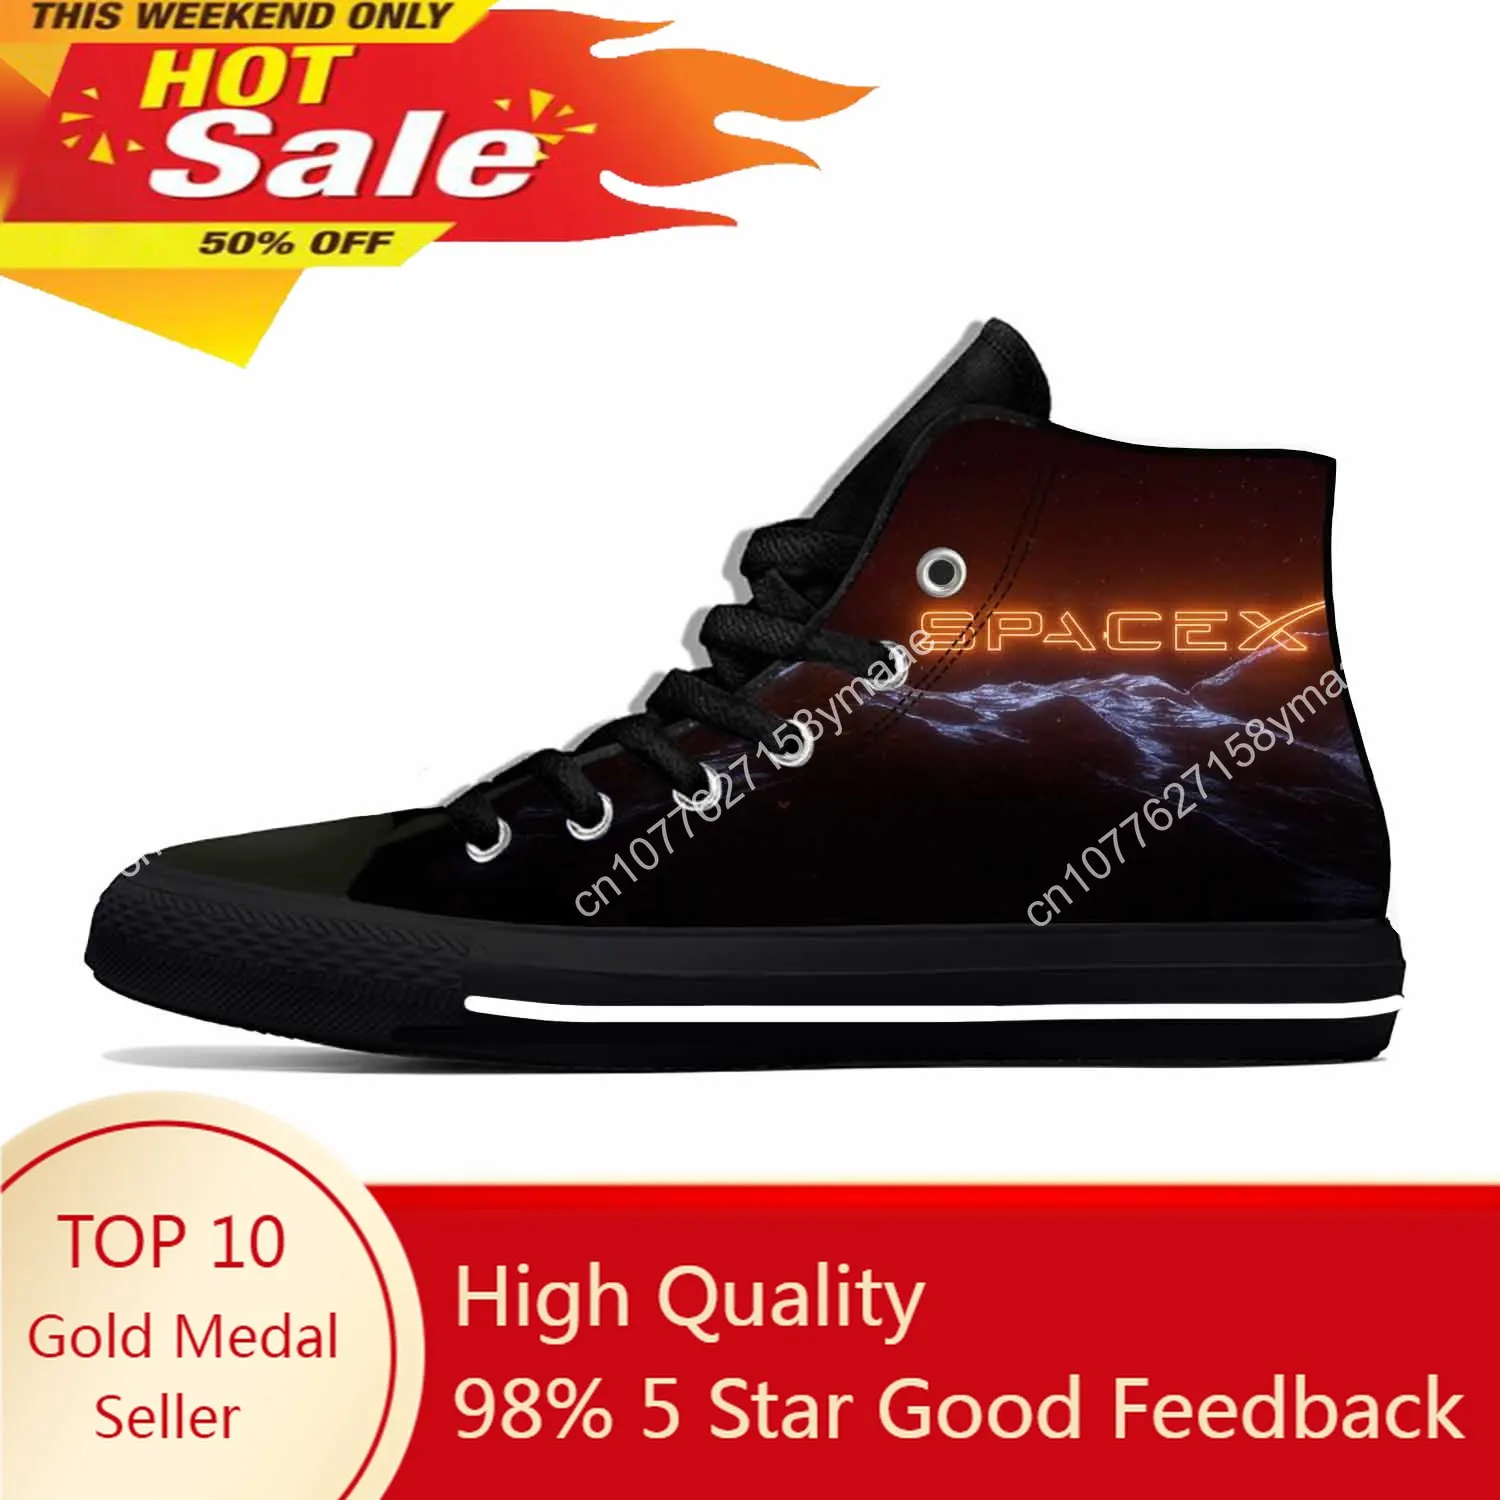 Anime Manga Cartoon SpaceX Space X Funny Fashion Casual Cloth Shoes High Top Lightweight Breathable 3D Print Men Women Sneakers